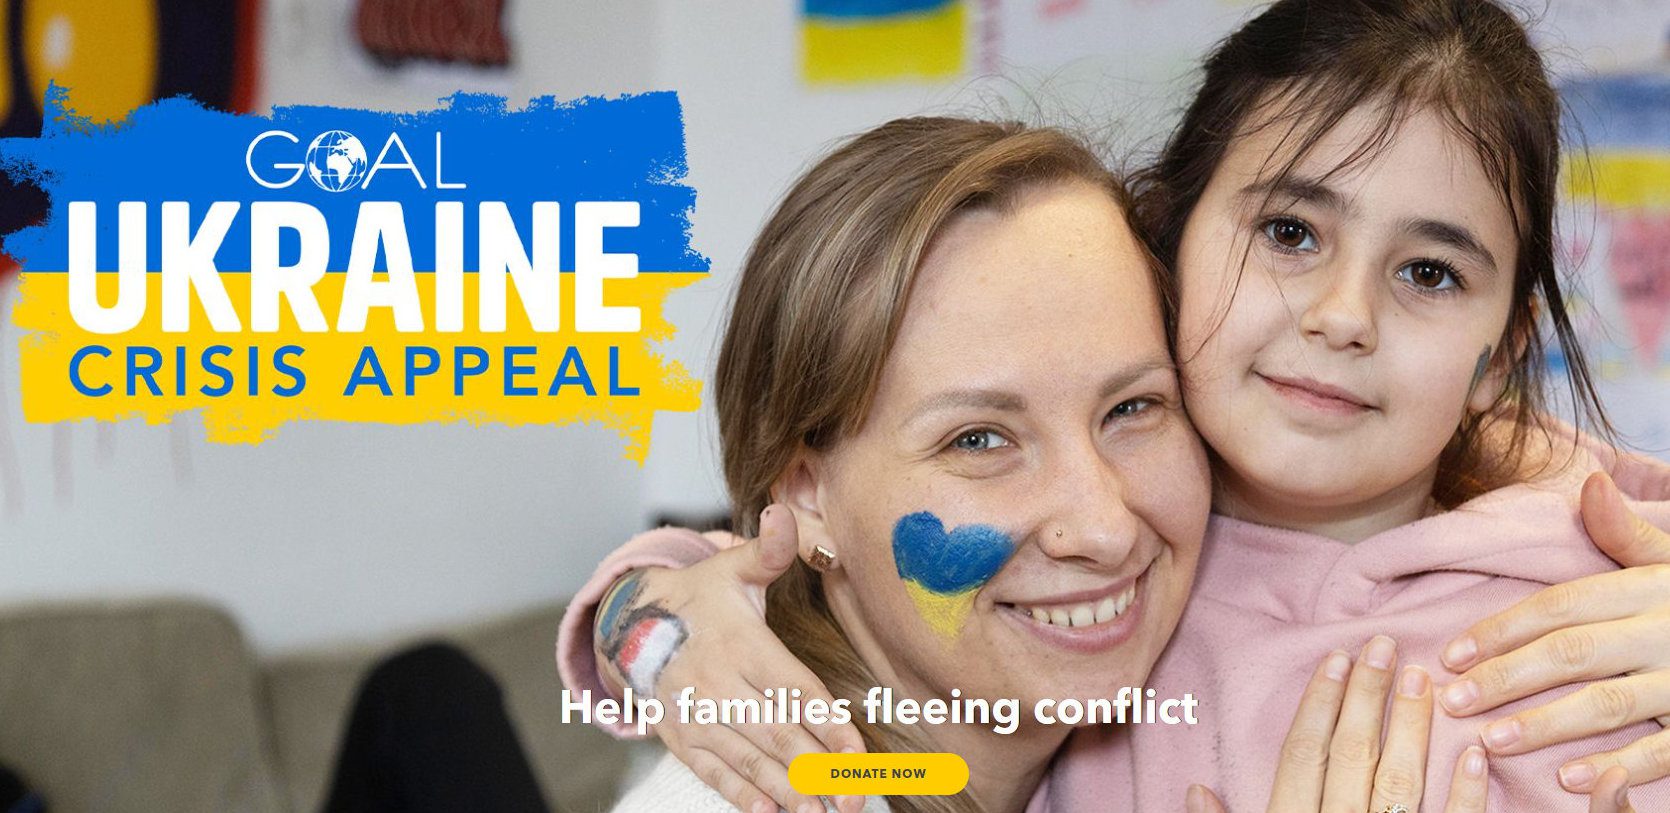 GOAL CONTINUES TO PROVIDE VITAL SUPPORT SERVICES TO UKRAINE